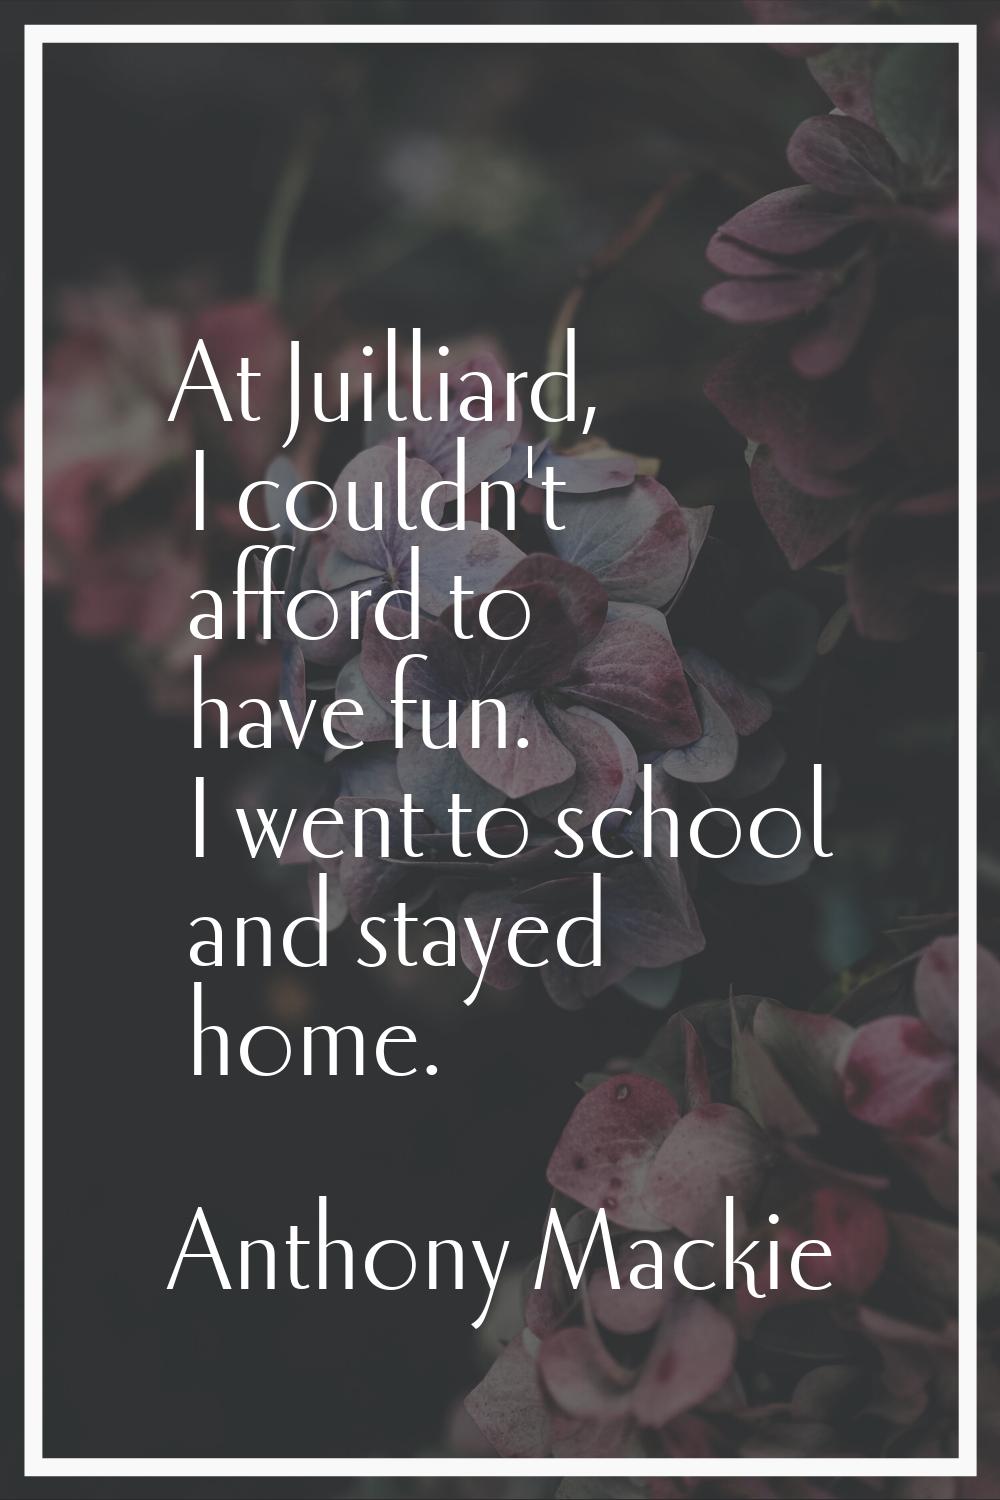 At Juilliard, I couldn't afford to have fun. I went to school and stayed home.